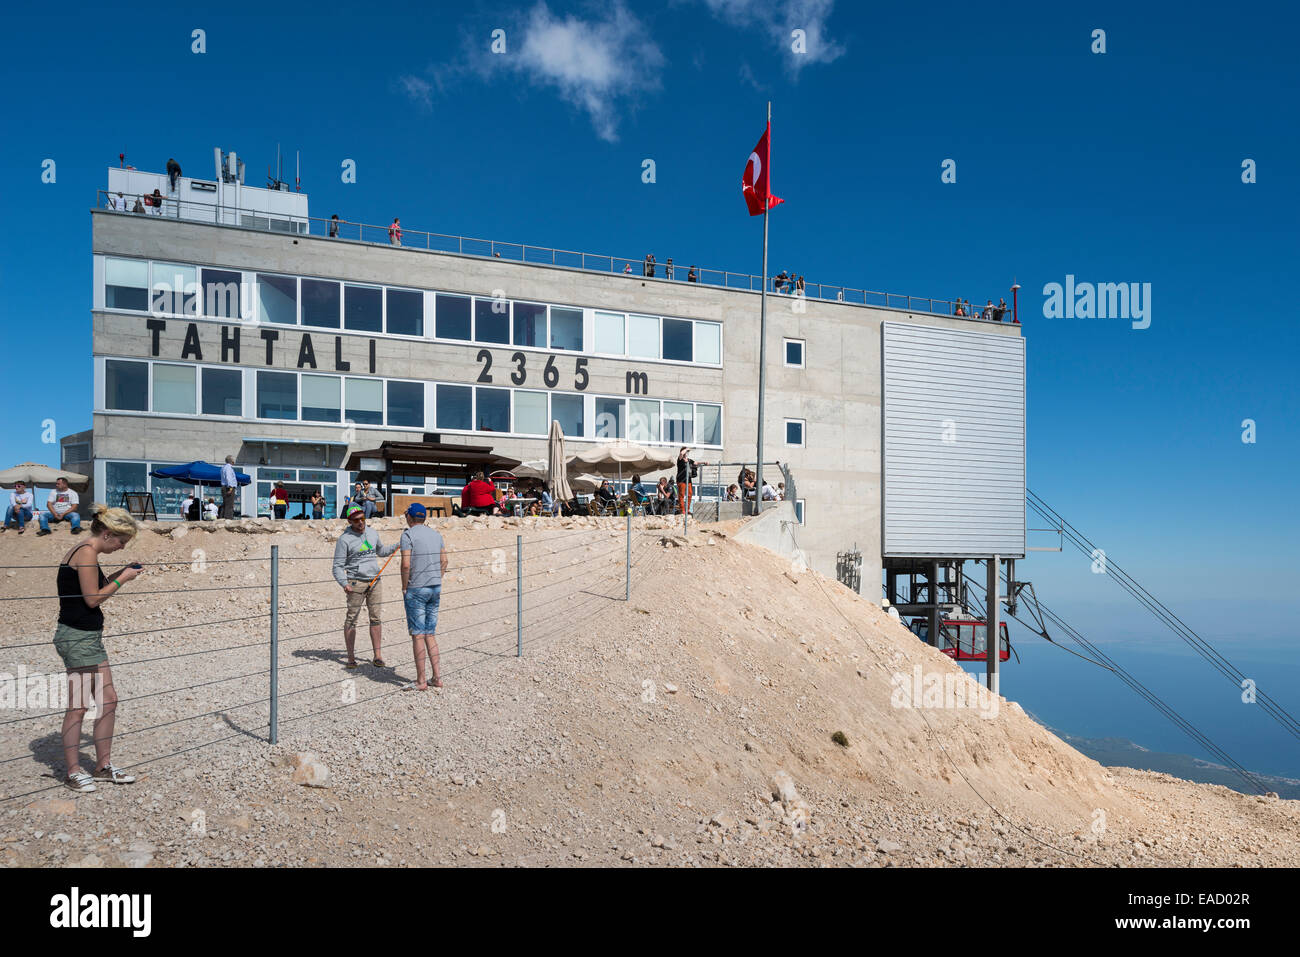 Top of Tahtalı Dagi mountain, 2366 m, mountain station of the cable car, built as a Turkish-Swiss cooperation in 2007 Stock Photo